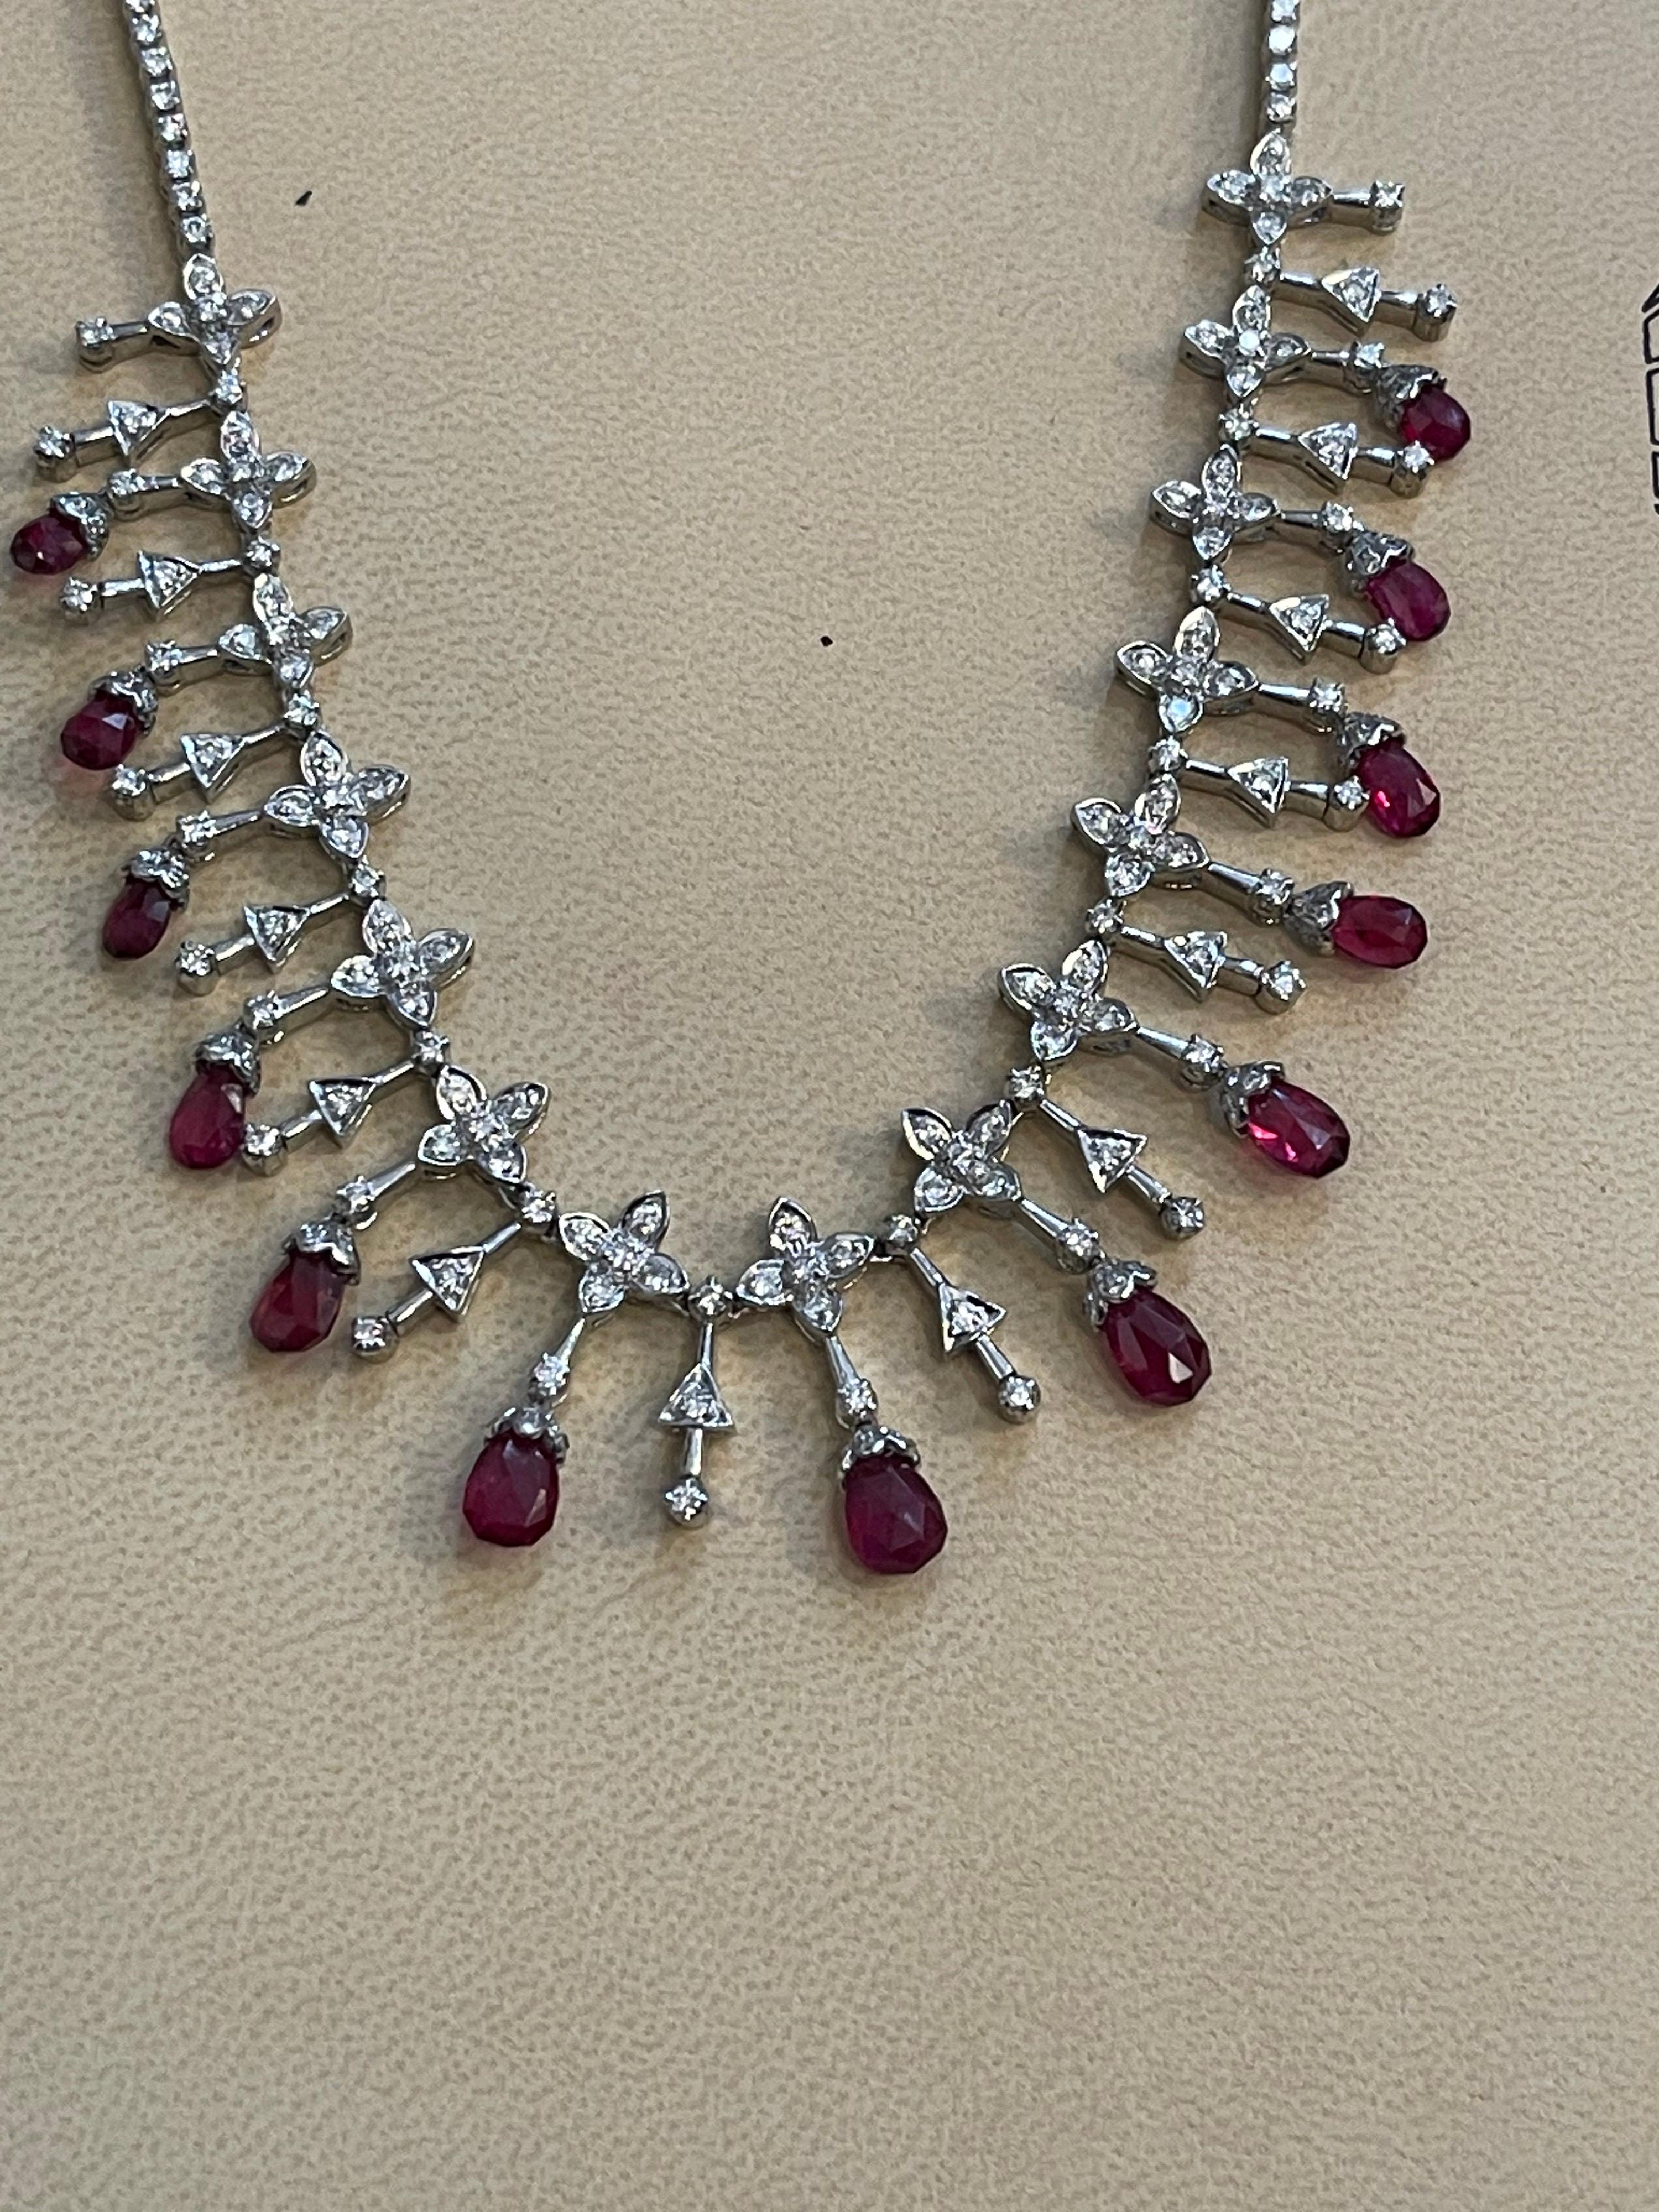 Natural Ruby Briolettes and Diamond Necklace 18 Karat White Gold, Estate 1